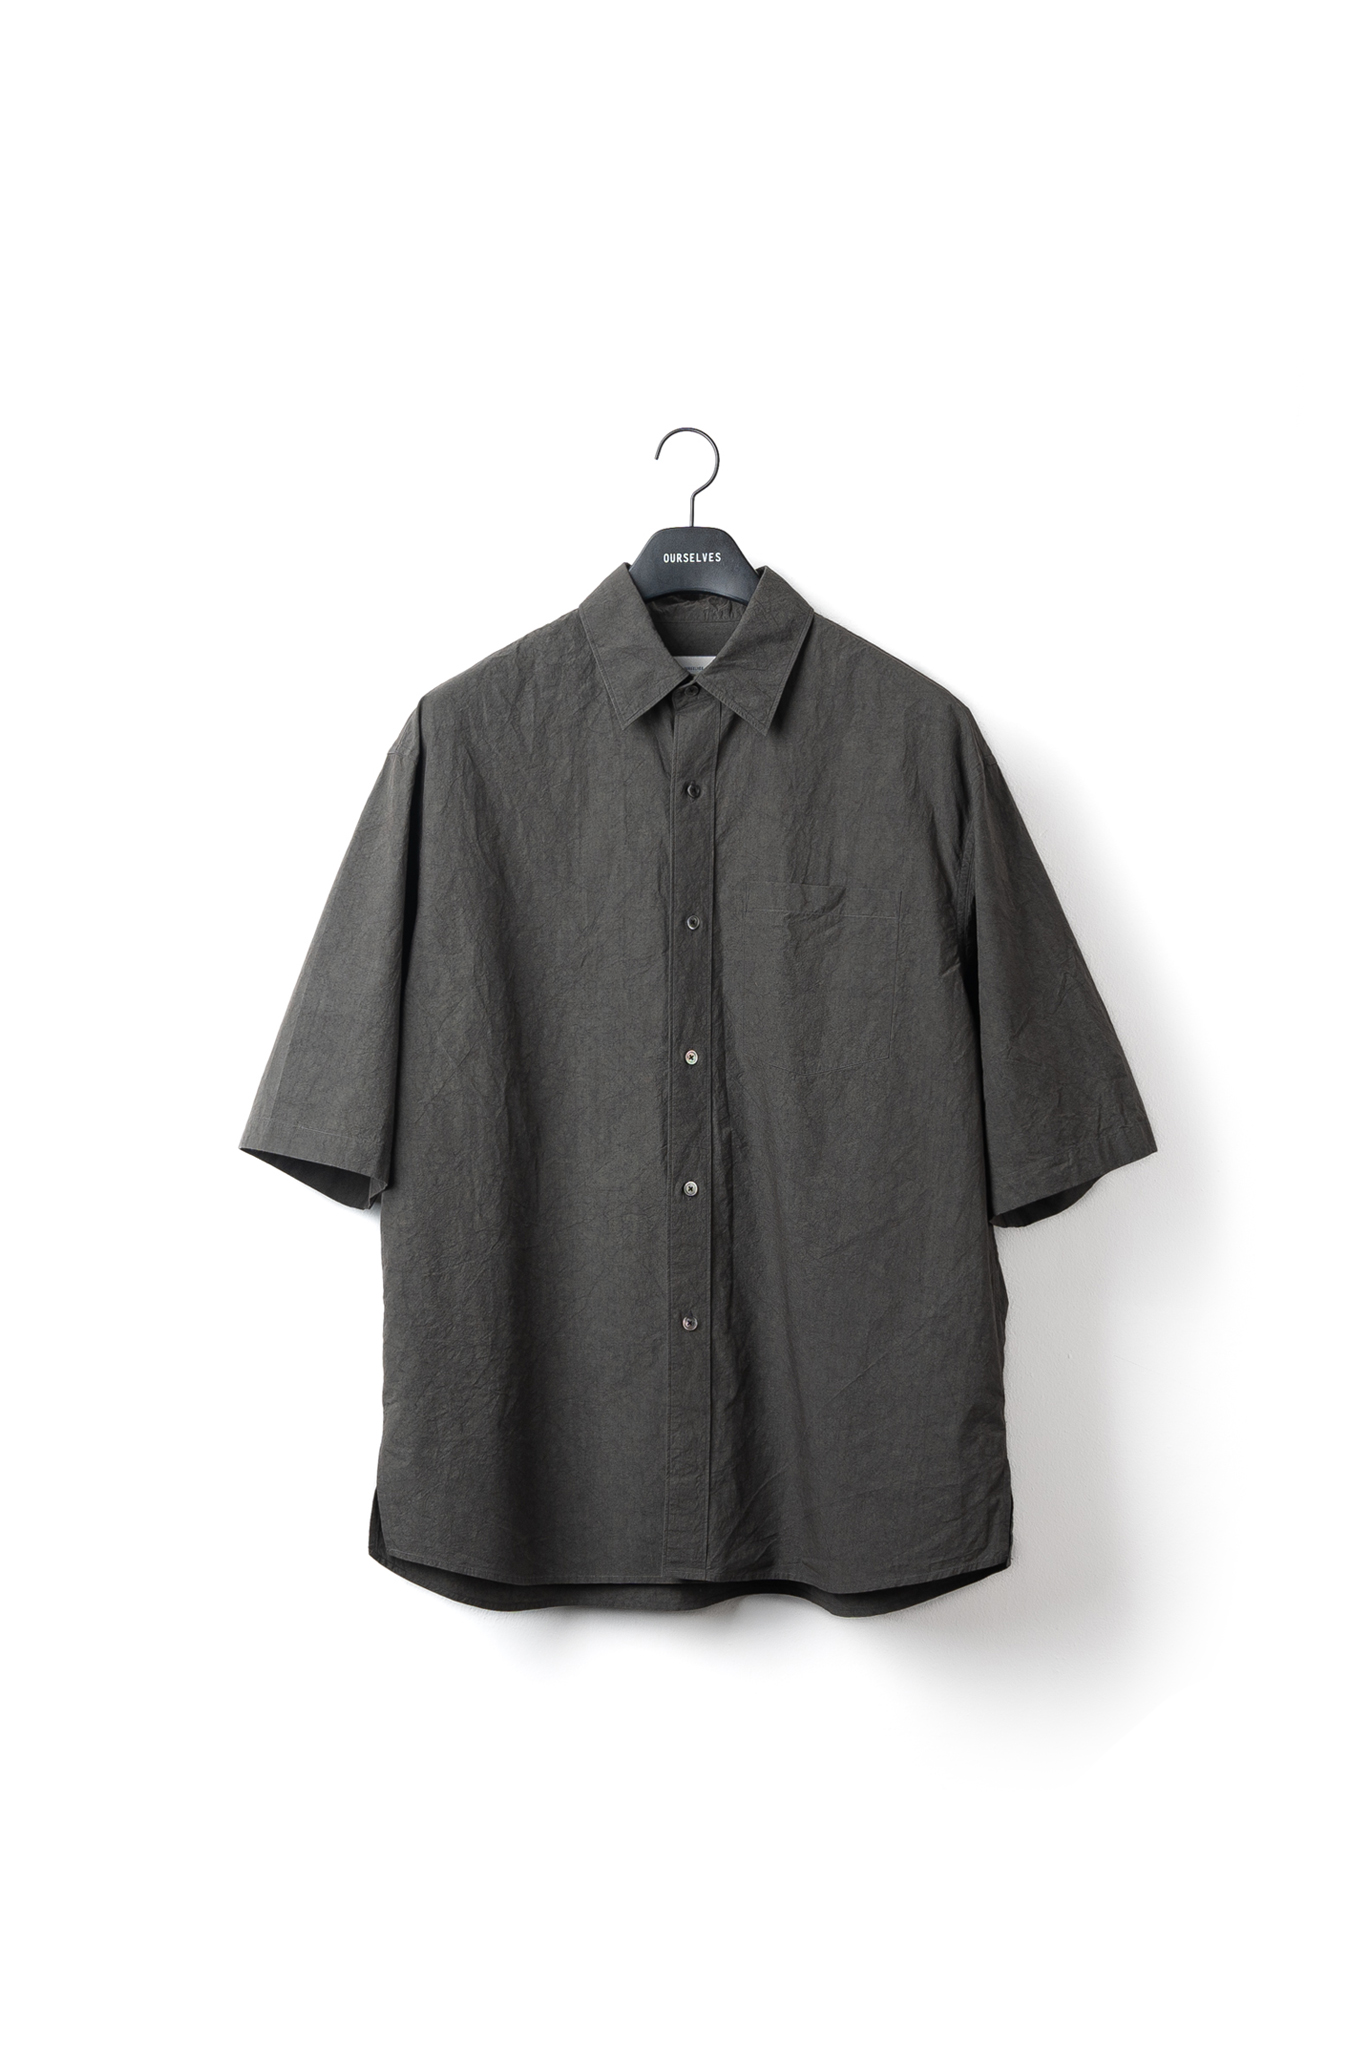 Texture Typewriter Relaxed Half Shirts - Charcoal